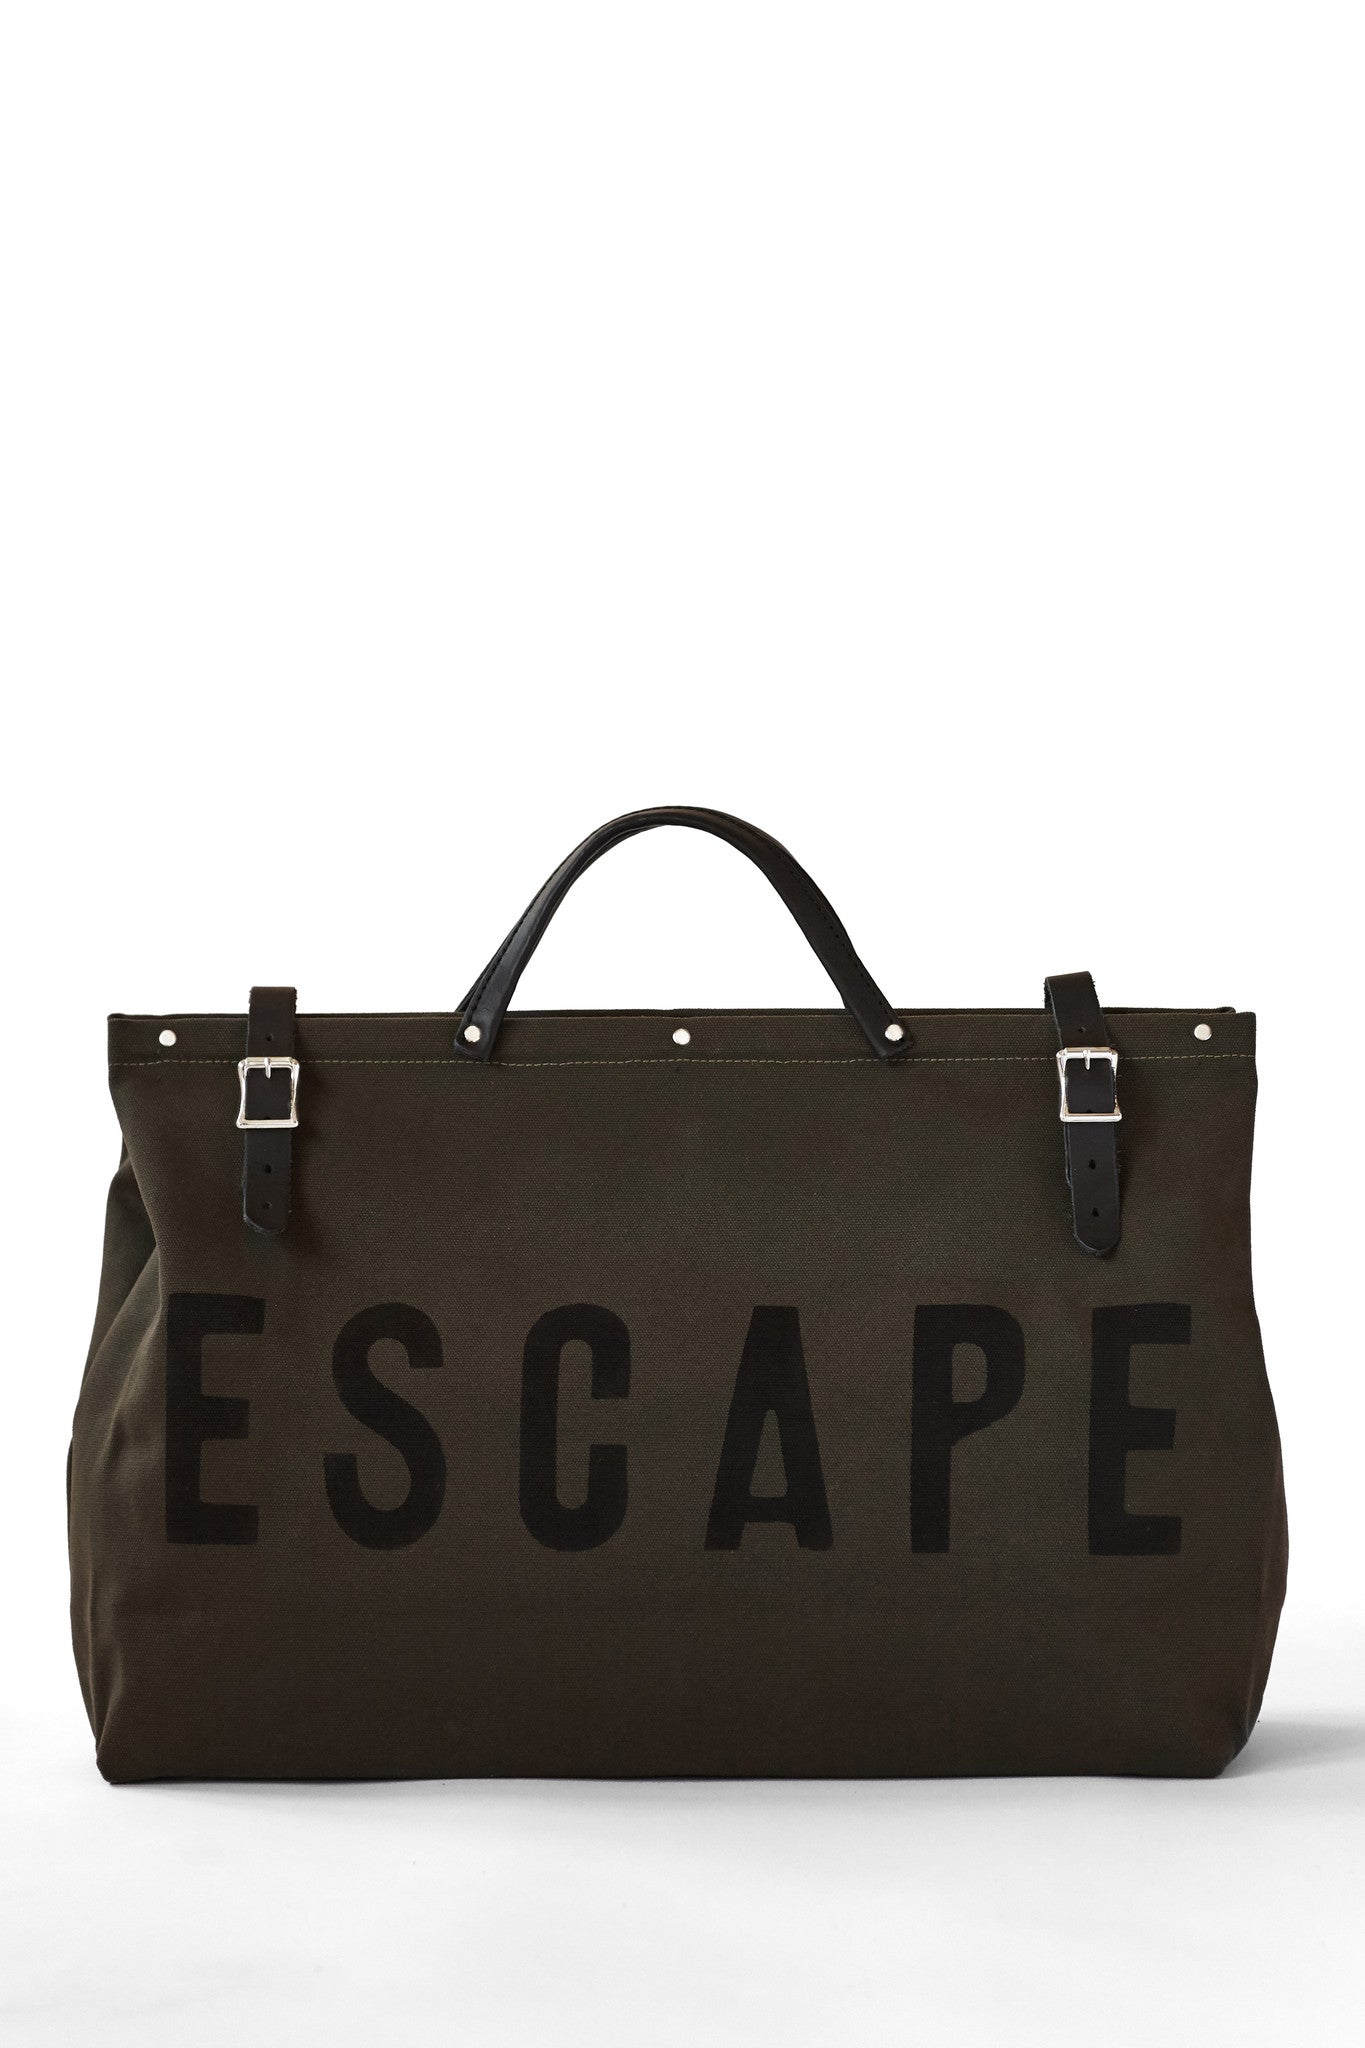 STATE OF ESCAPE Women - Tote Bags - Shop Online | Lane Crawford